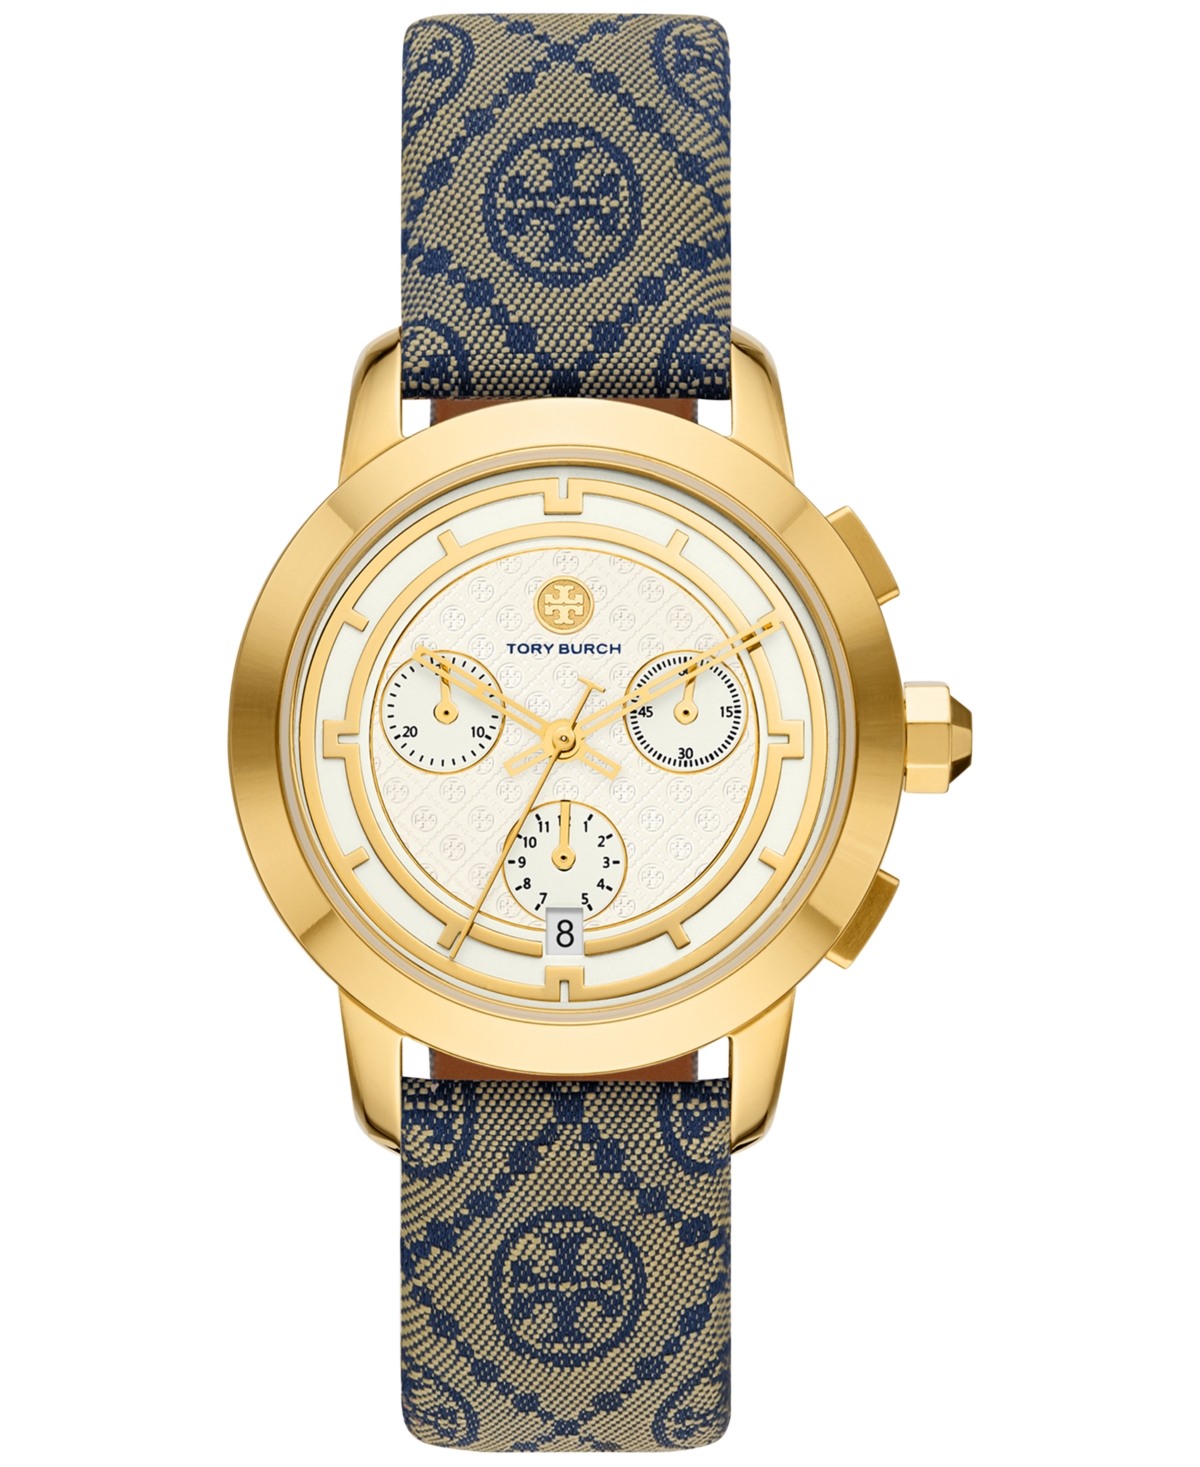 Tory Burch Women's Chronograph The Tory Blue Fabric & Luggage Leather Strap  Watch 37mm & Reviews - All Watches - Jewelry & Watches - Macy's